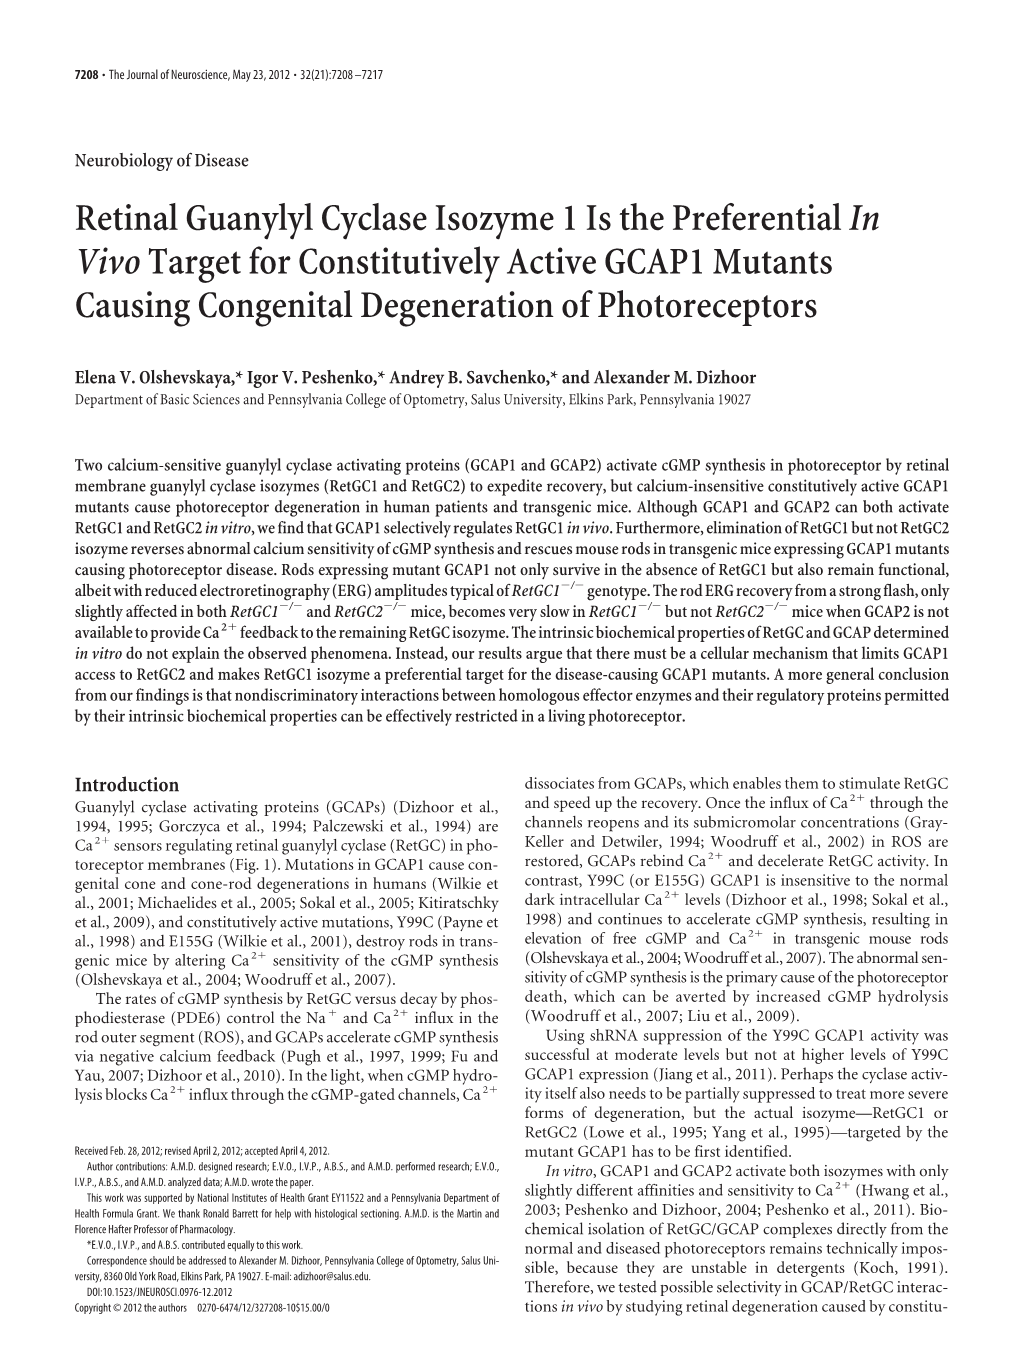 Retinal Guanylyl Cyclase Isozyme 1 Is the Preferentialin Vivotarget for Constitutively Active GCAP1 Mutants Causing Congenital D